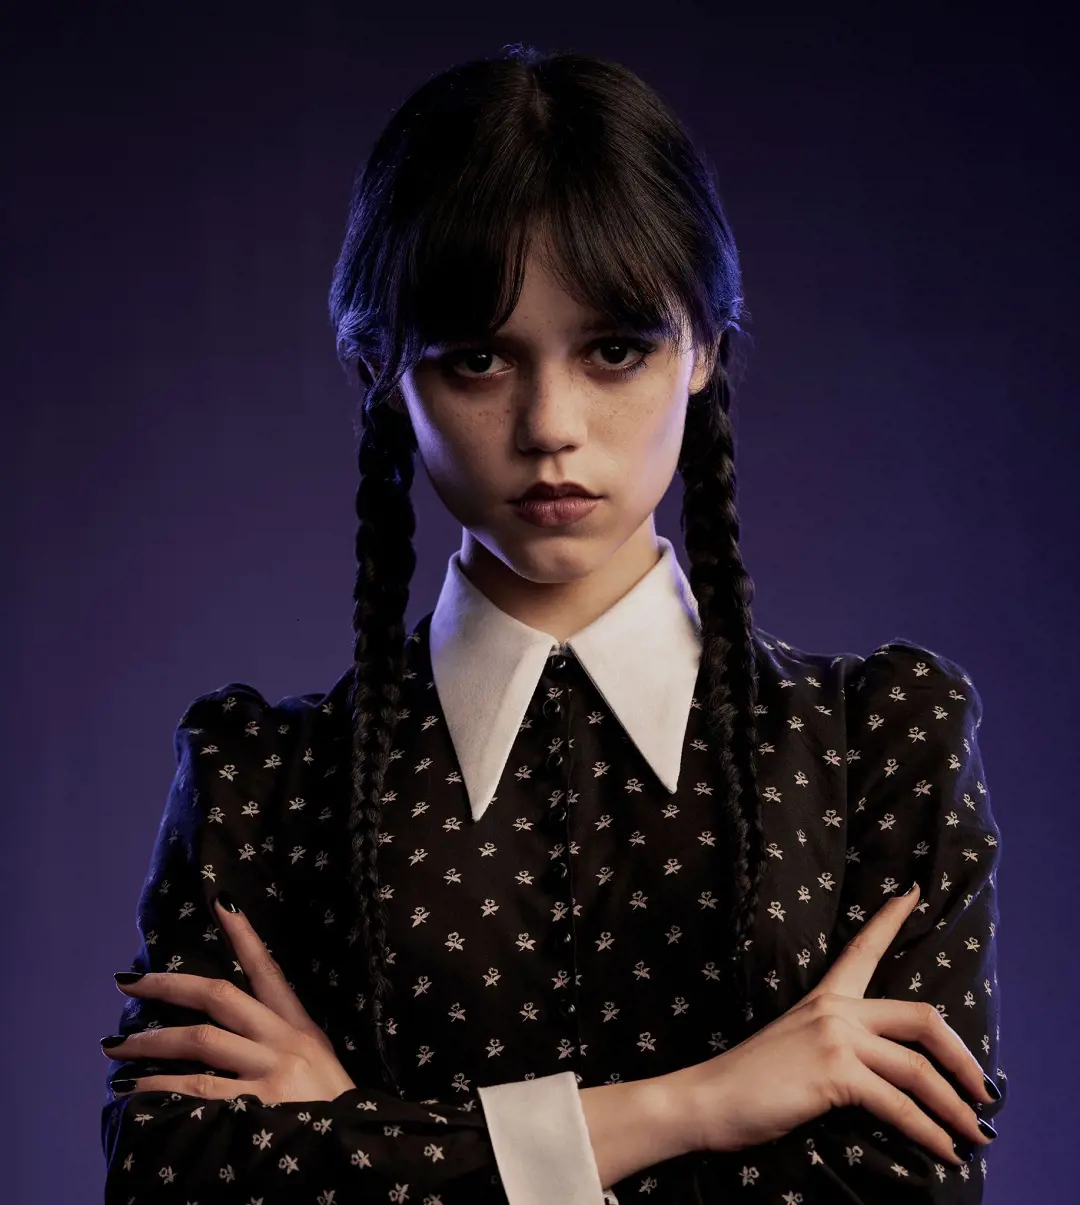 When Wednesday Addams was expelled from her school, she joined Nevermore Academy, a school for the monstrous outcast, due to her parent's force 